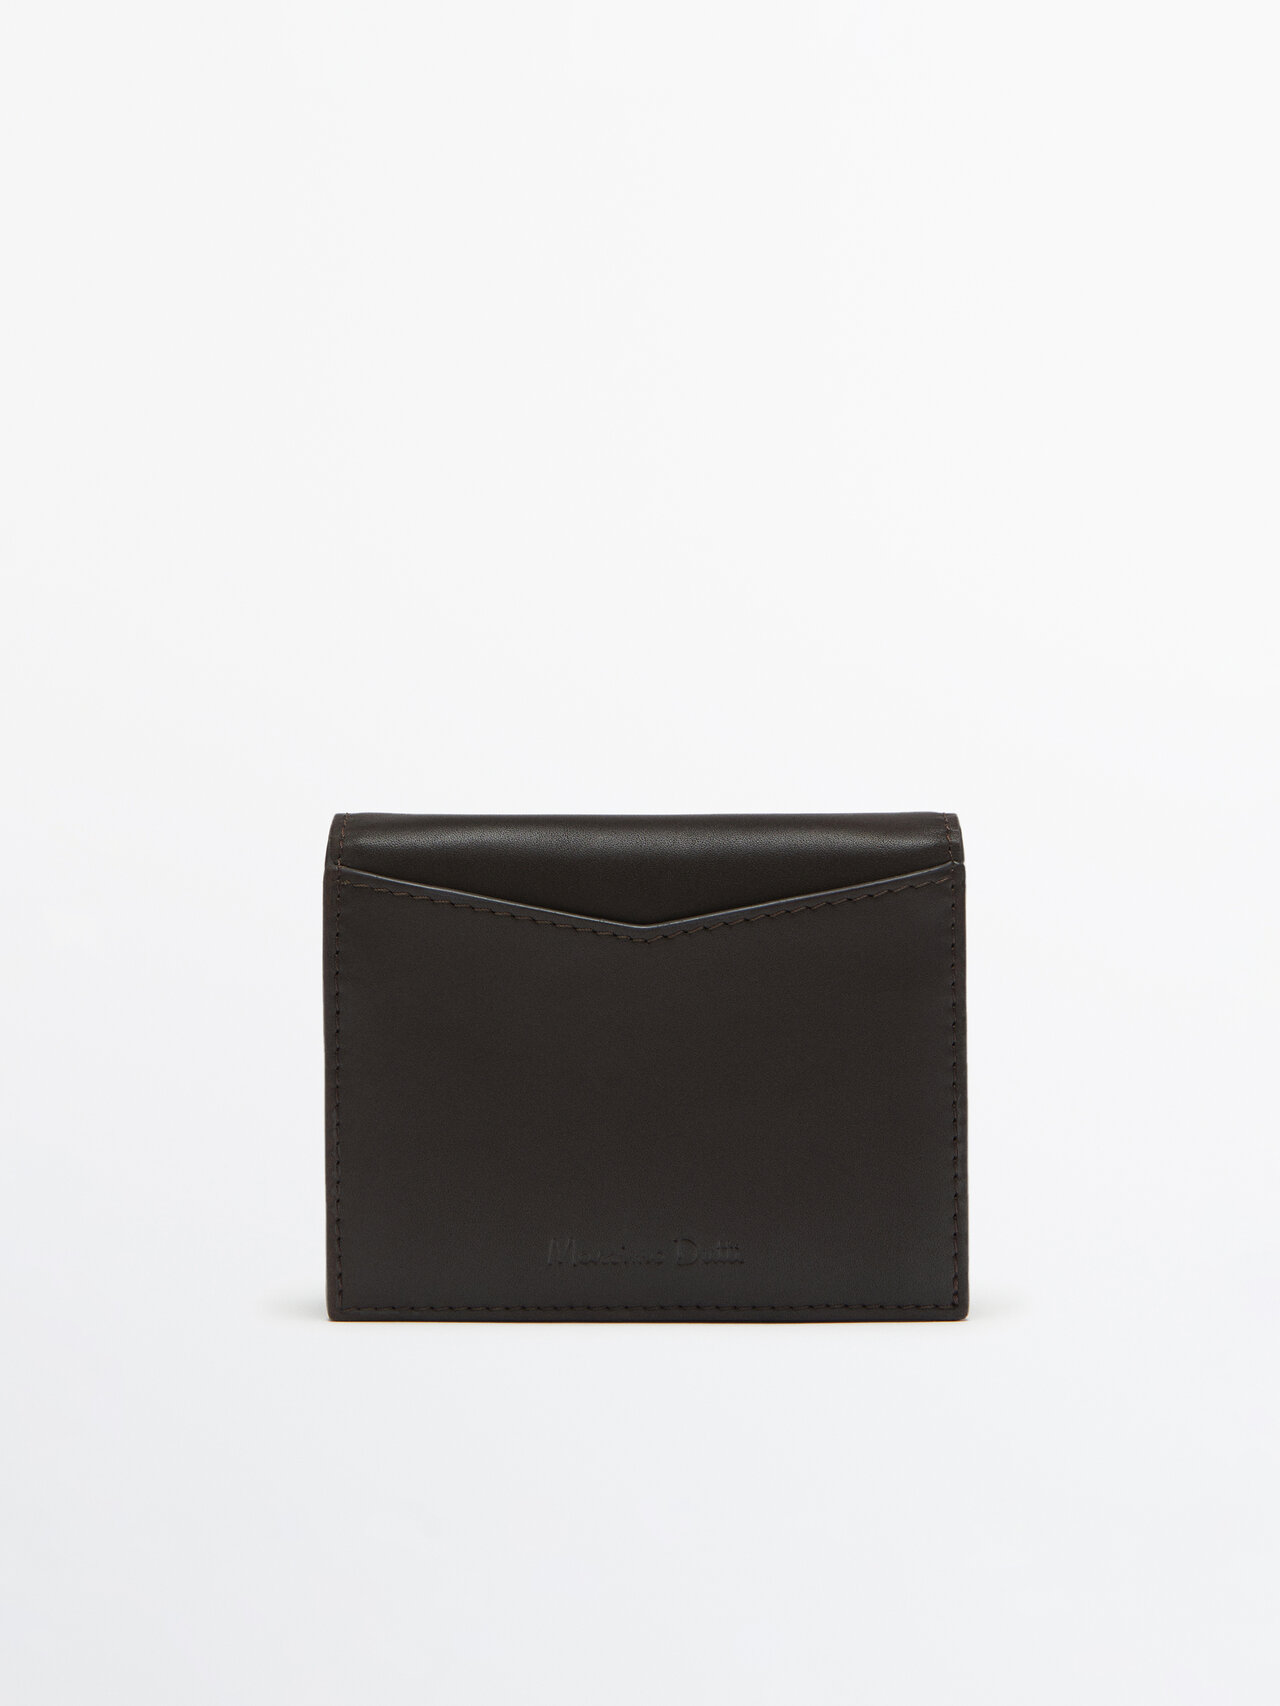 Massimo Dutti Leather Wallet In Brown